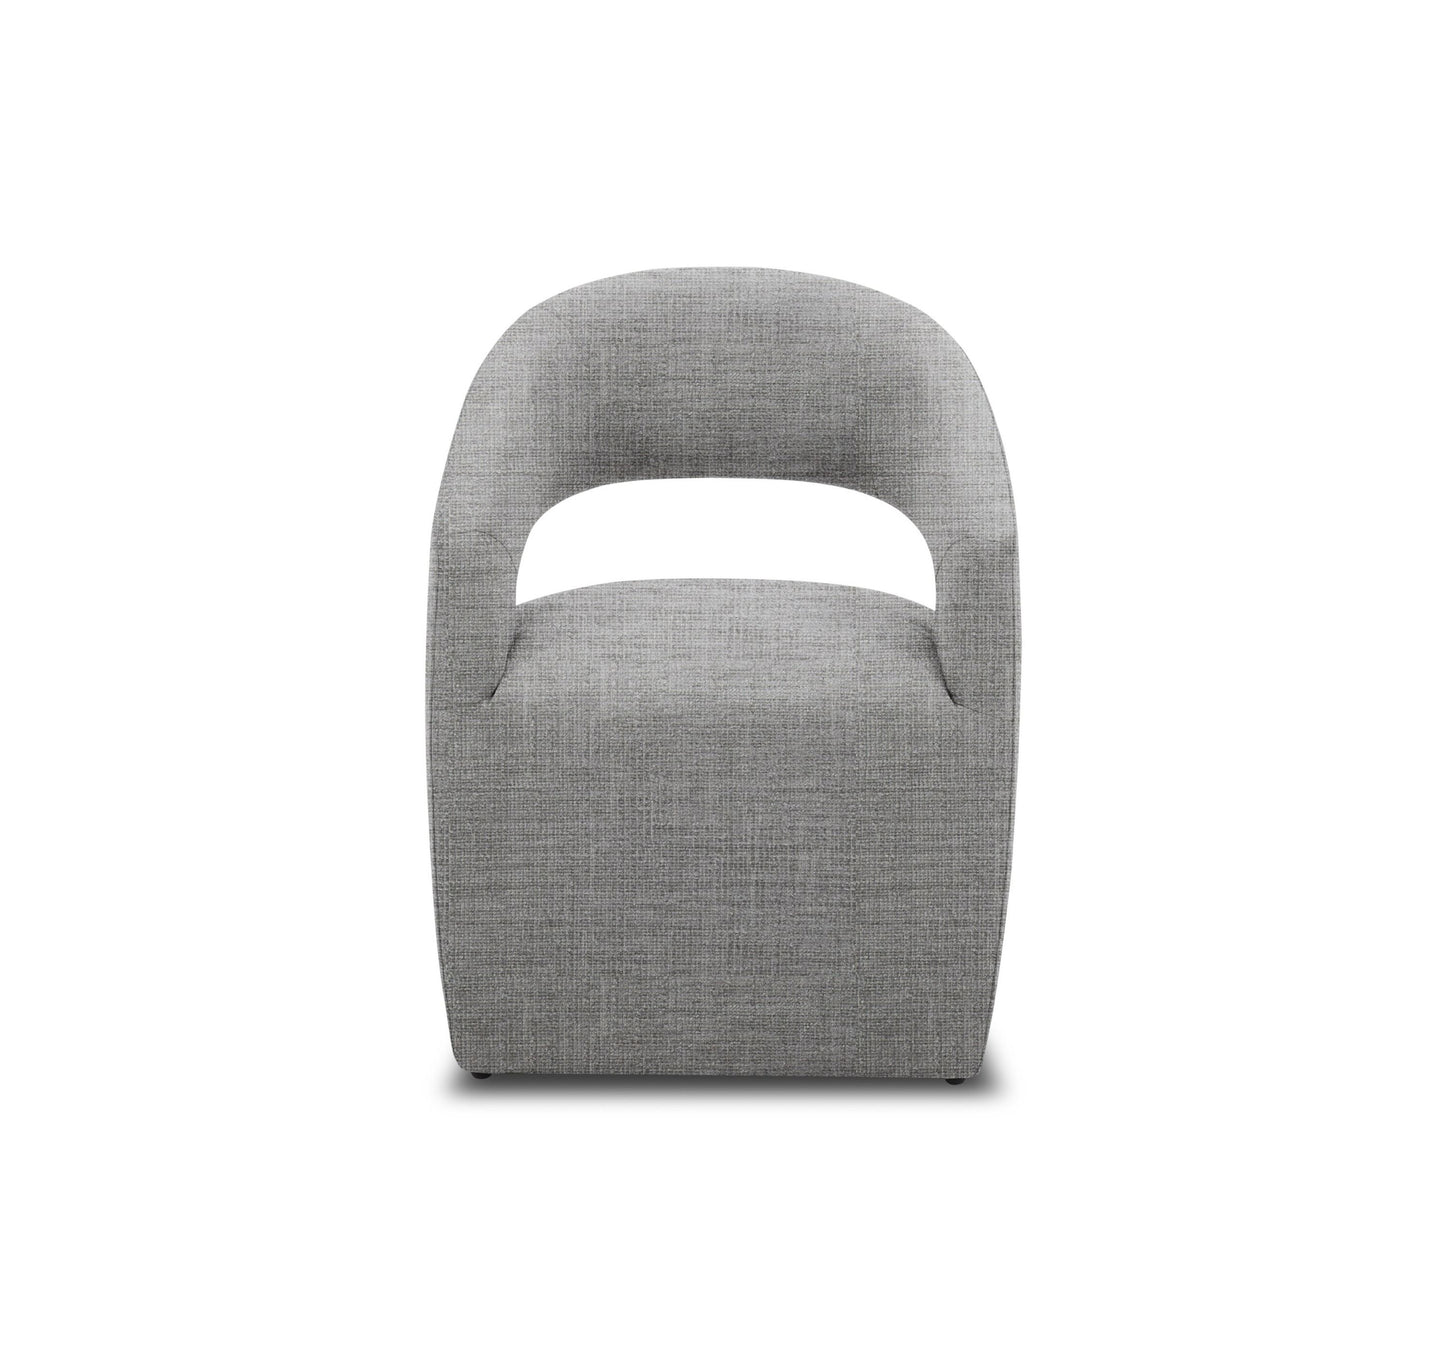 Modrest Angie - Modern Grey Fabric Accent Chair